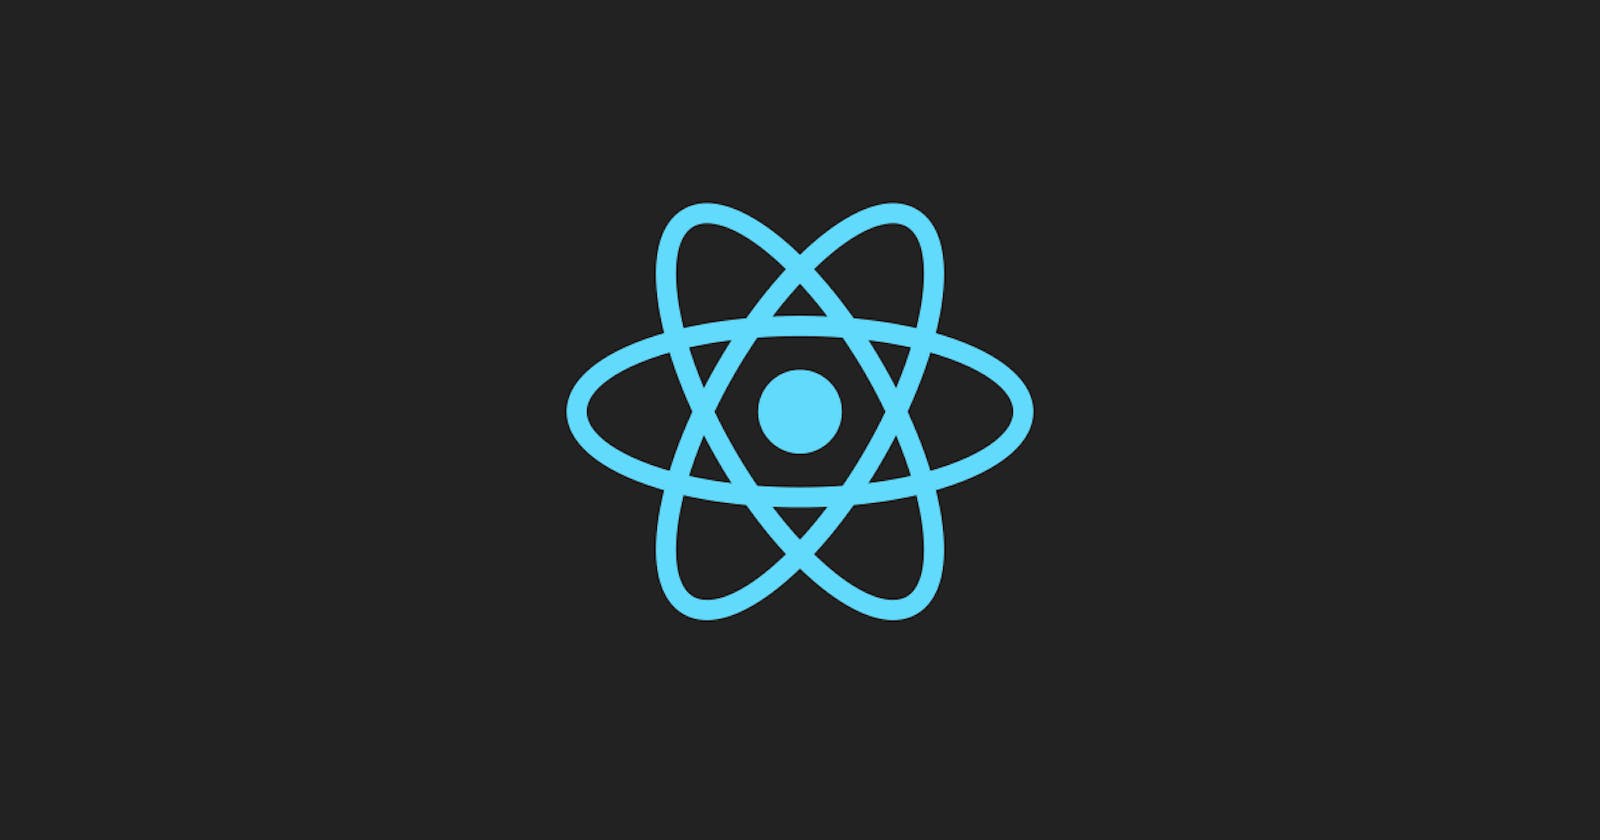 Custom hooks, Use Context, and States in React